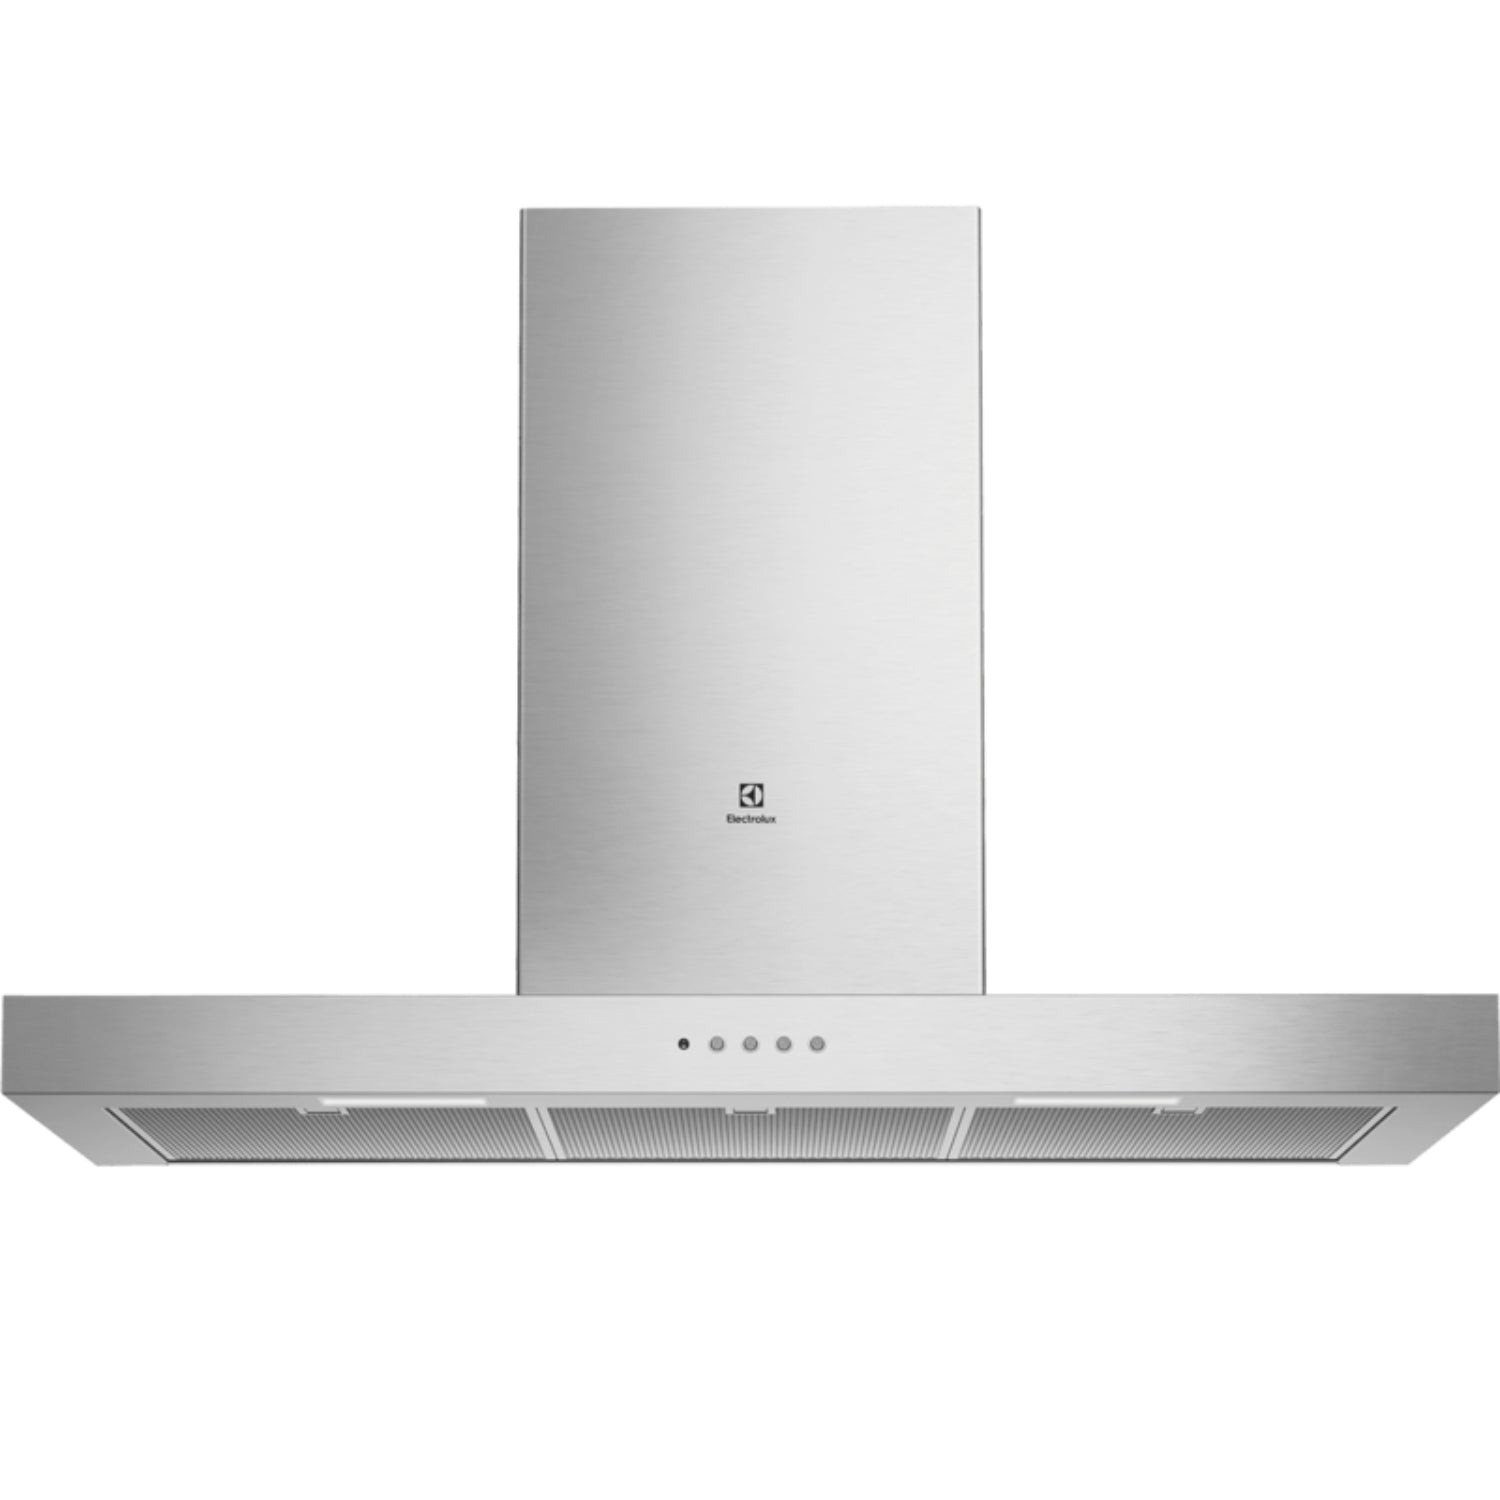 Electrolux 90cm Slope Extractor Hood with 3 Speed Settings and Dishwasher-safe Filter, Stainless Steel